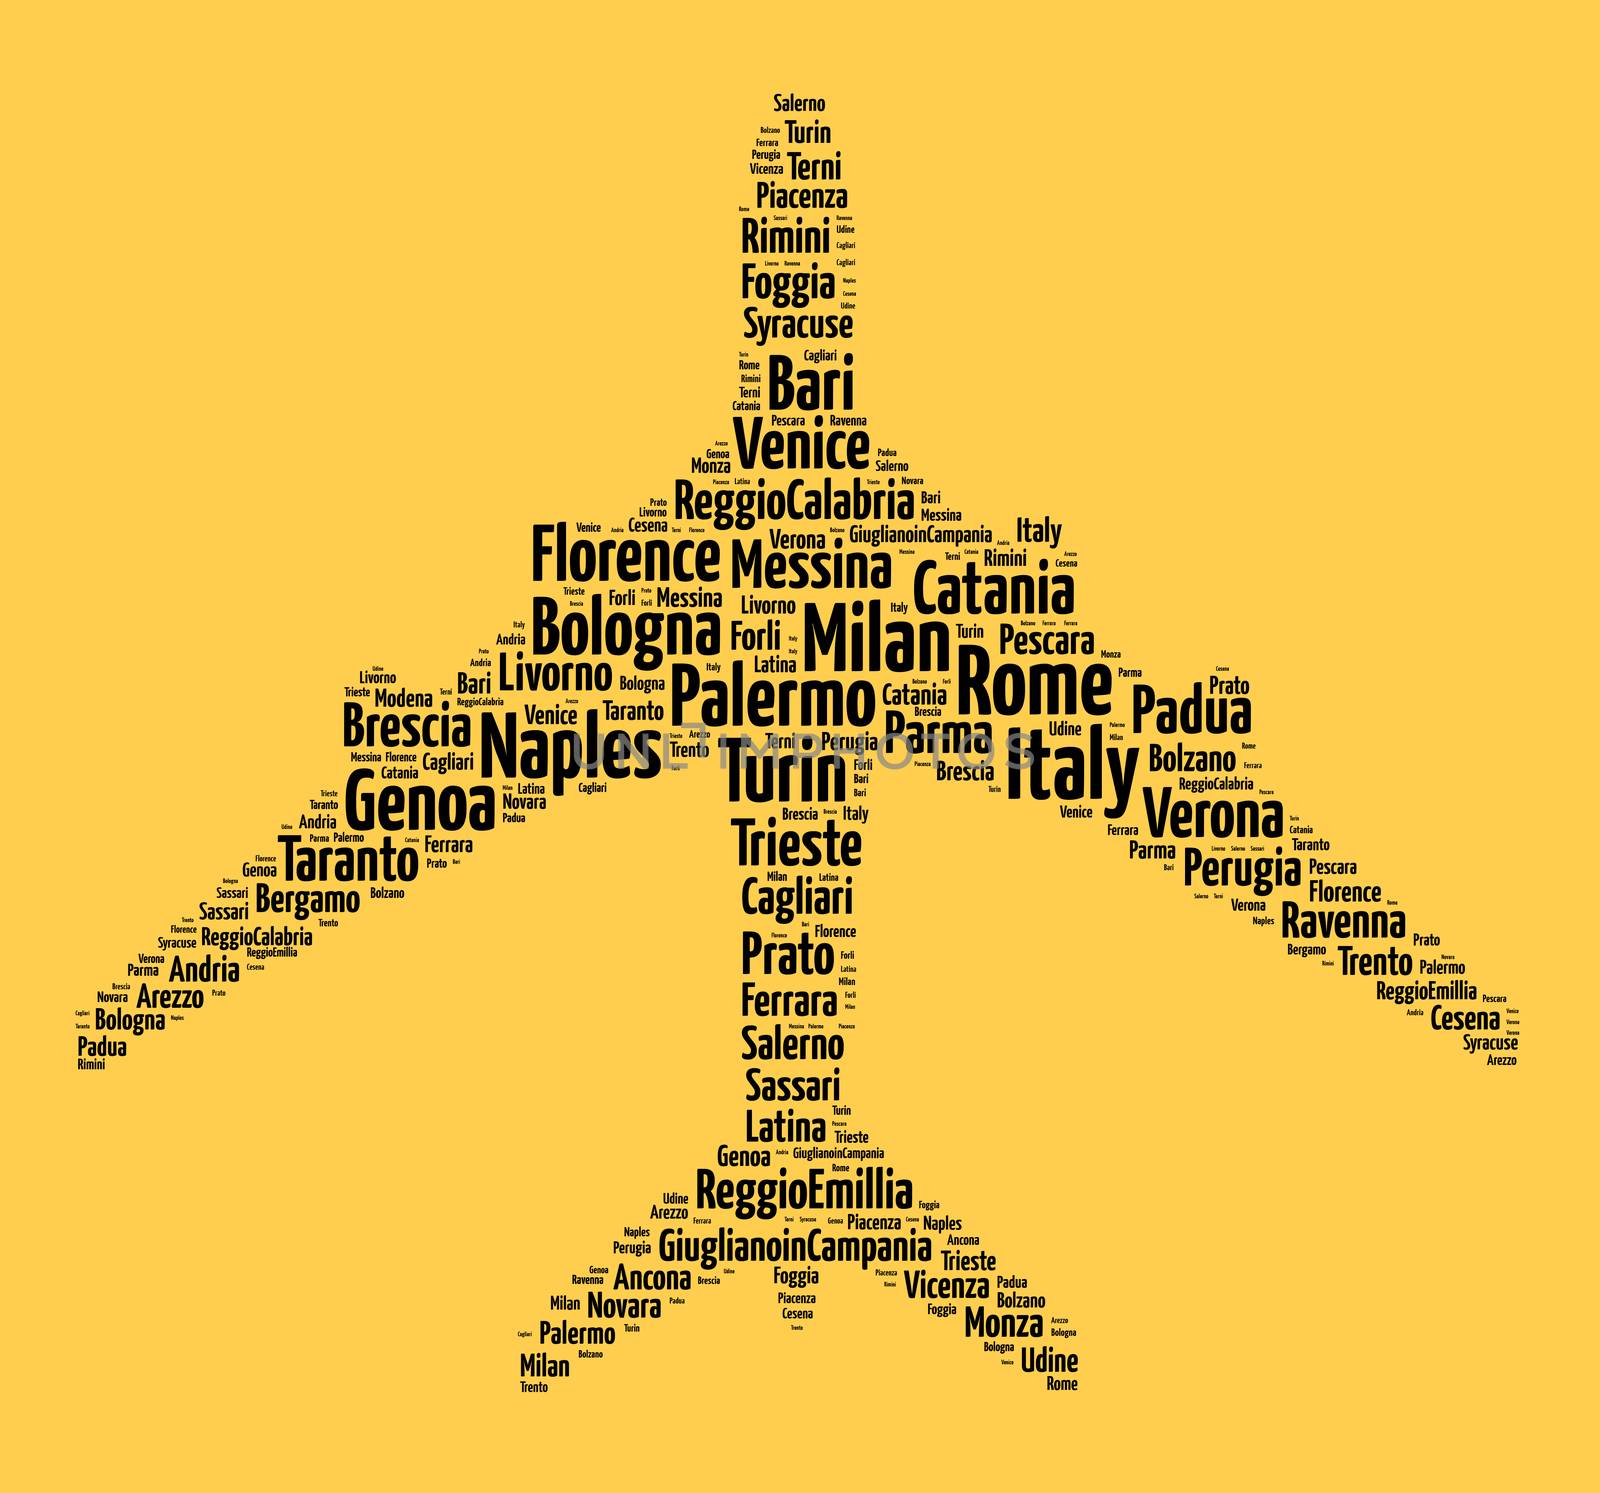 Localities in Italy word cloud concept over airplane shape